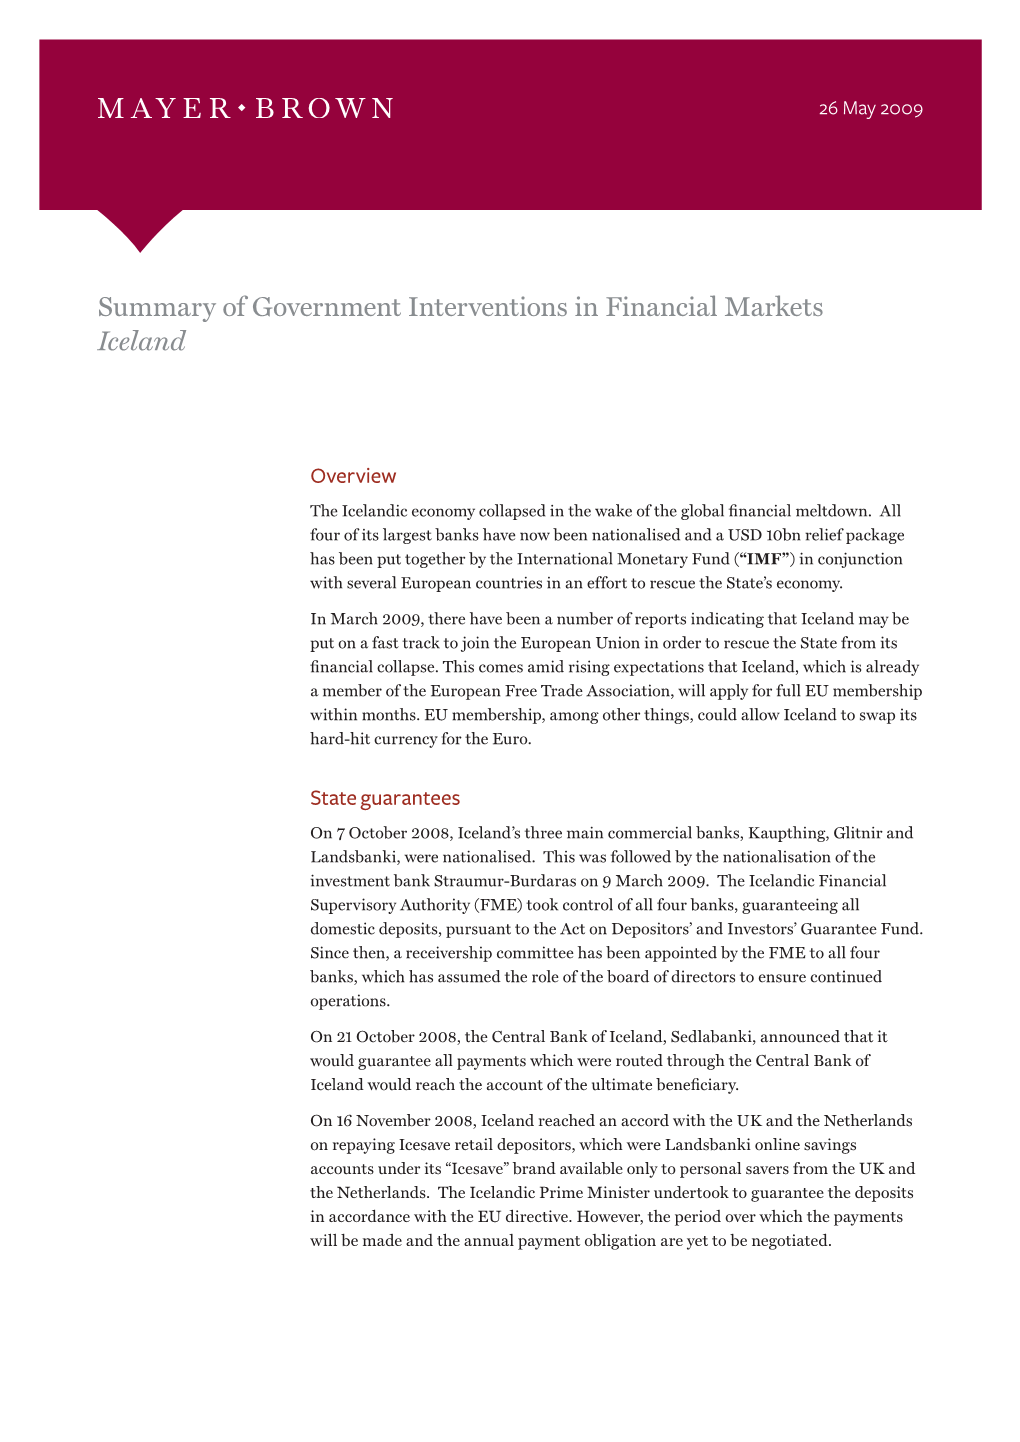 Summary of Government Interventions in Financial Markets Iceland